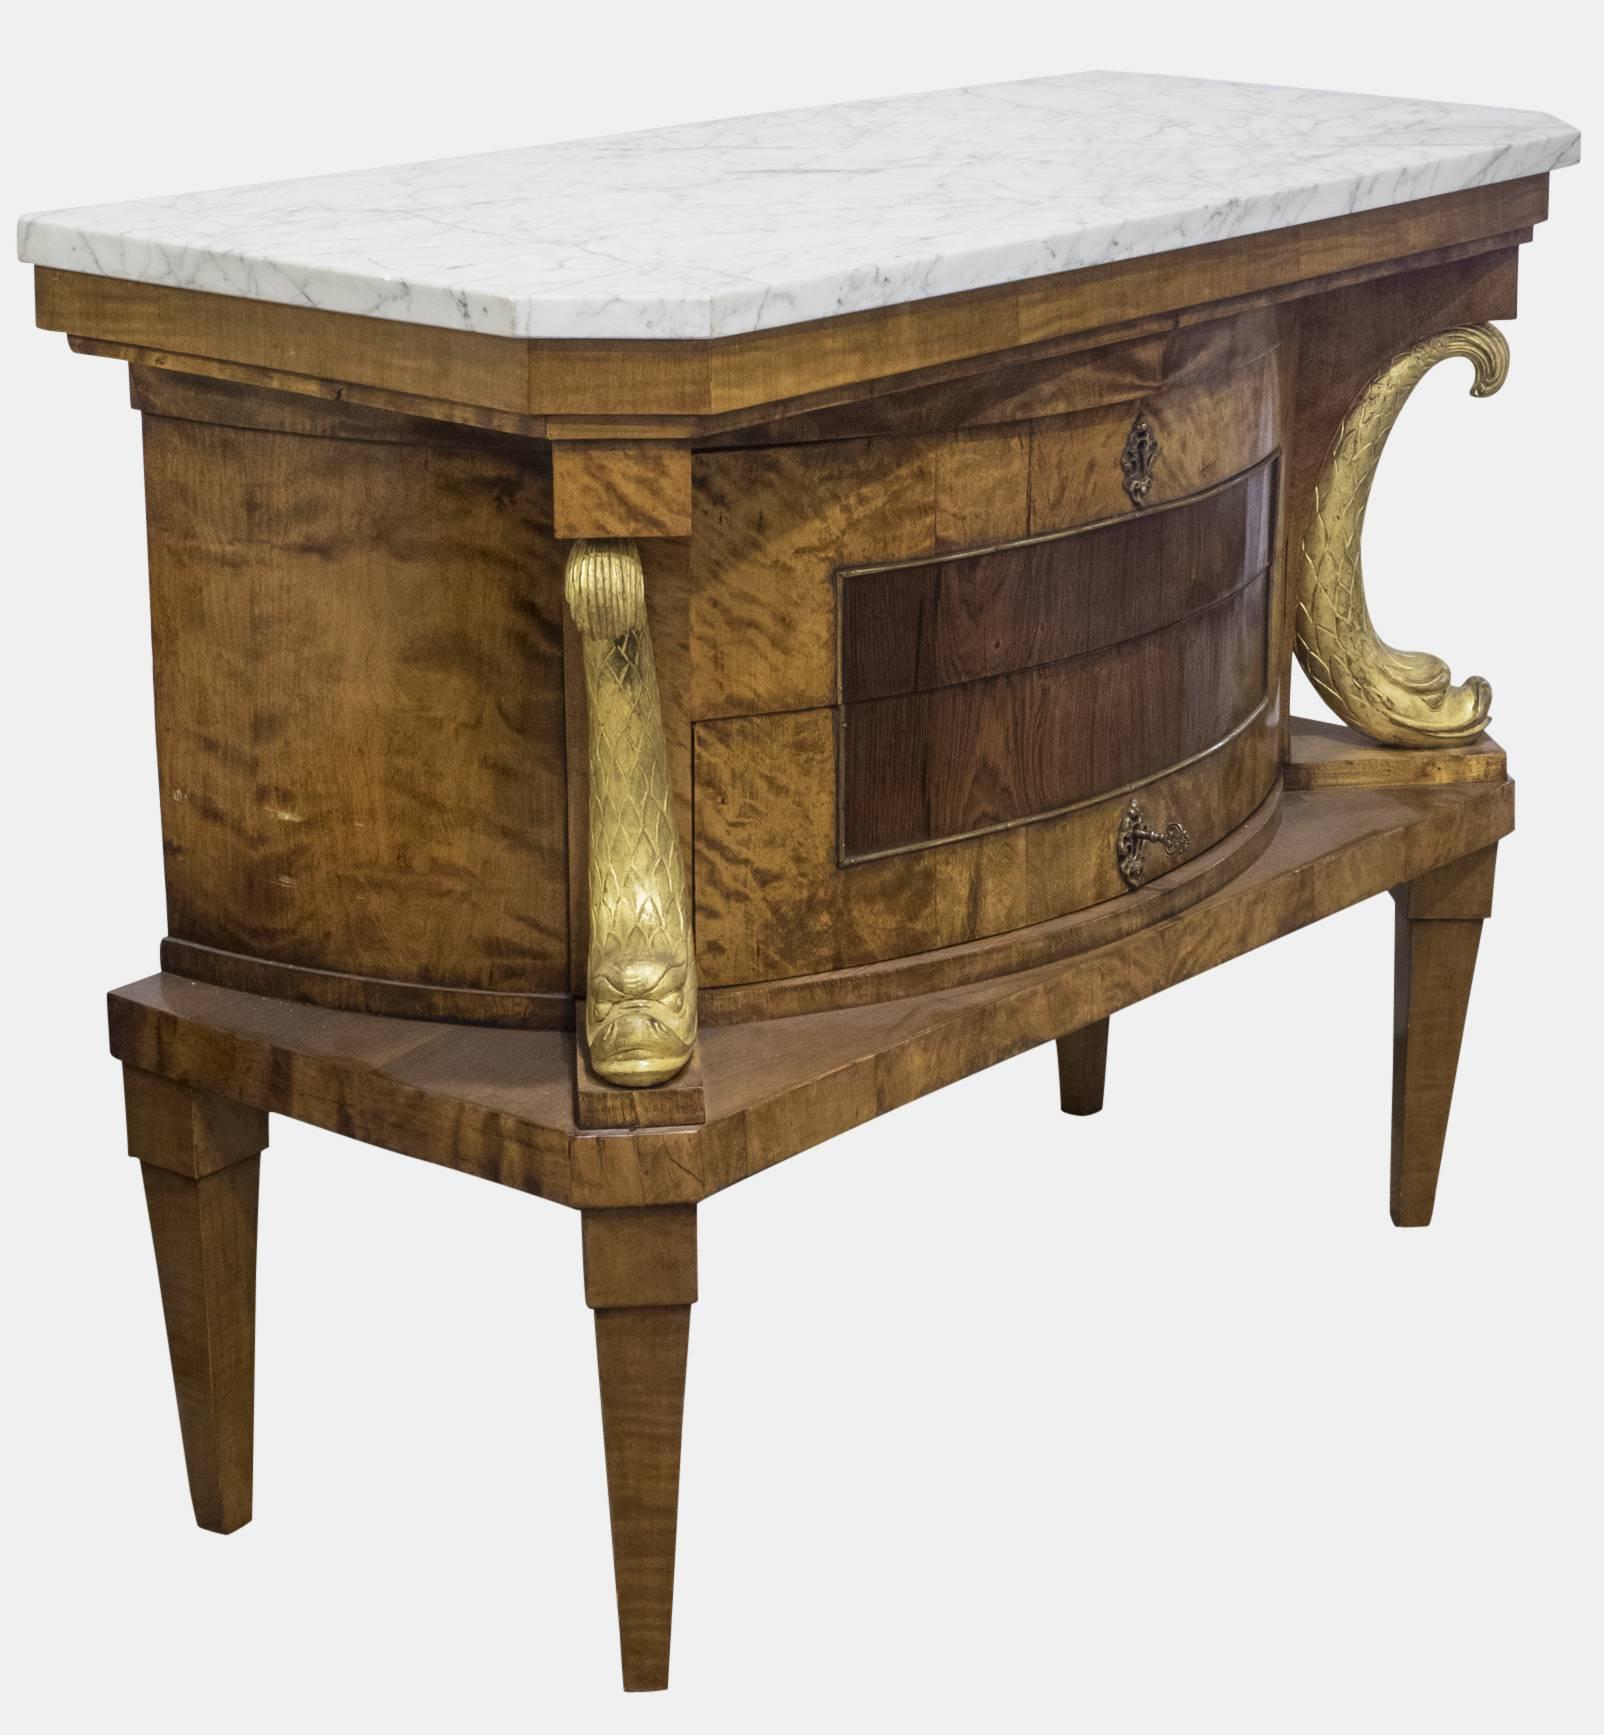 A Beidermeier style marble topped commode with gilded dolphin supports and bowed centre section with two drawers.